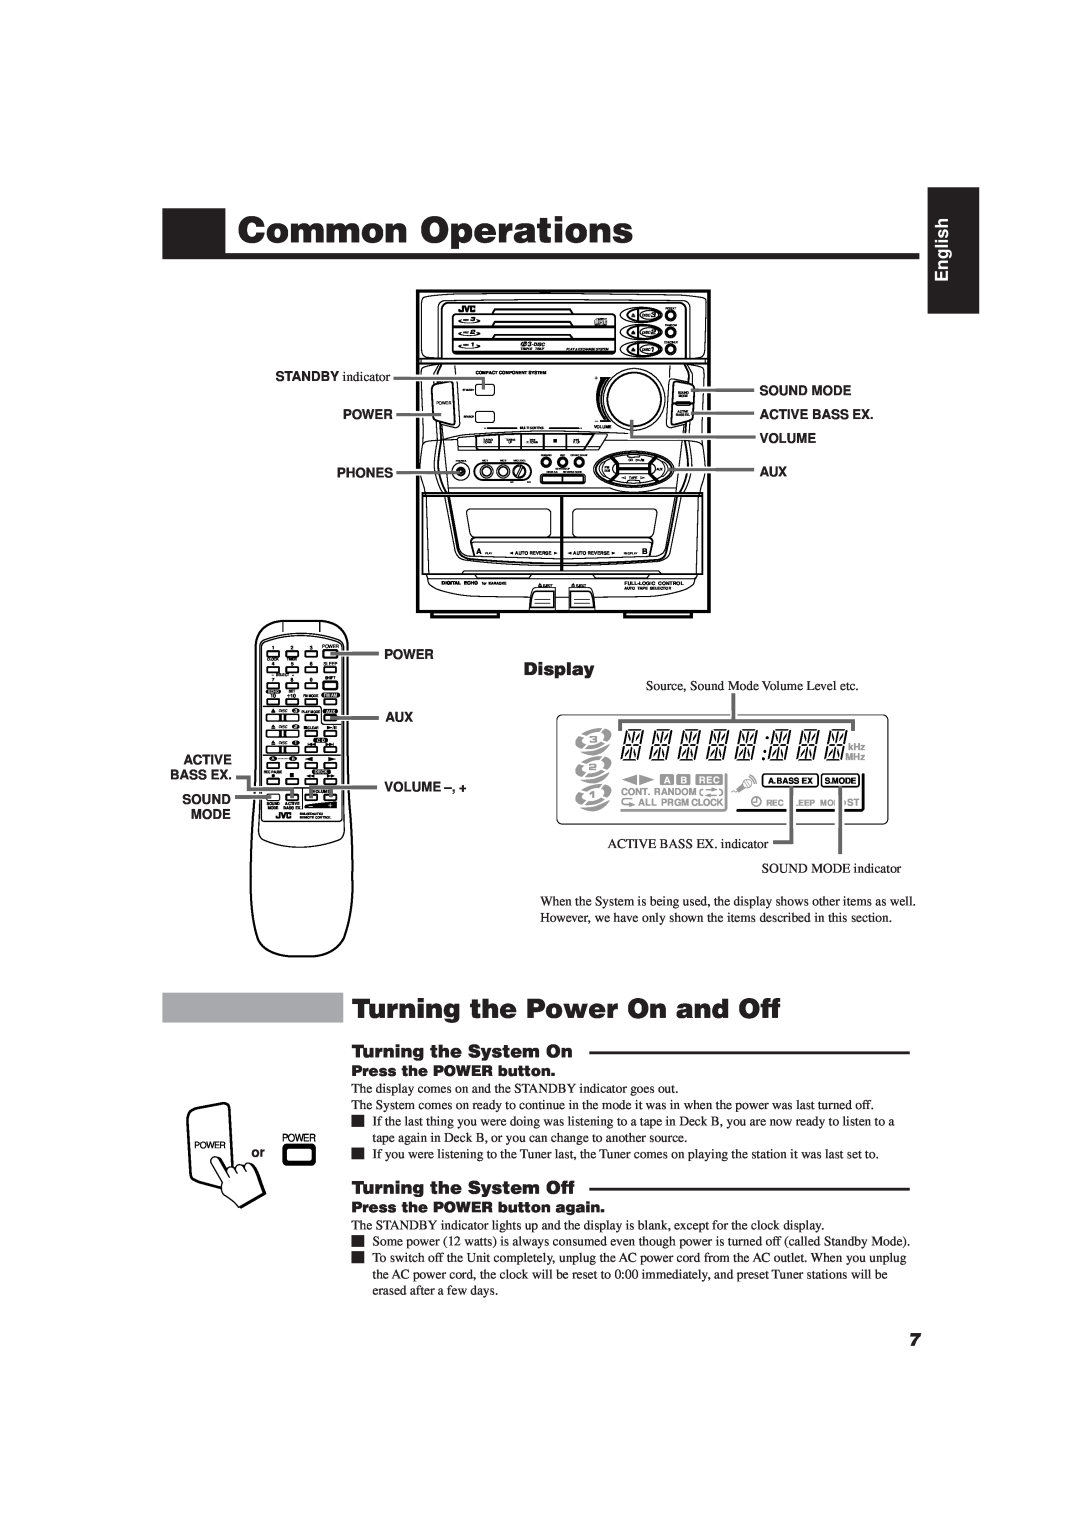 JVC CA-D501T manual Common Operations, Turning the Power On and Off, English, Sound Mode, Active Bass Ex, Volume, Phones 